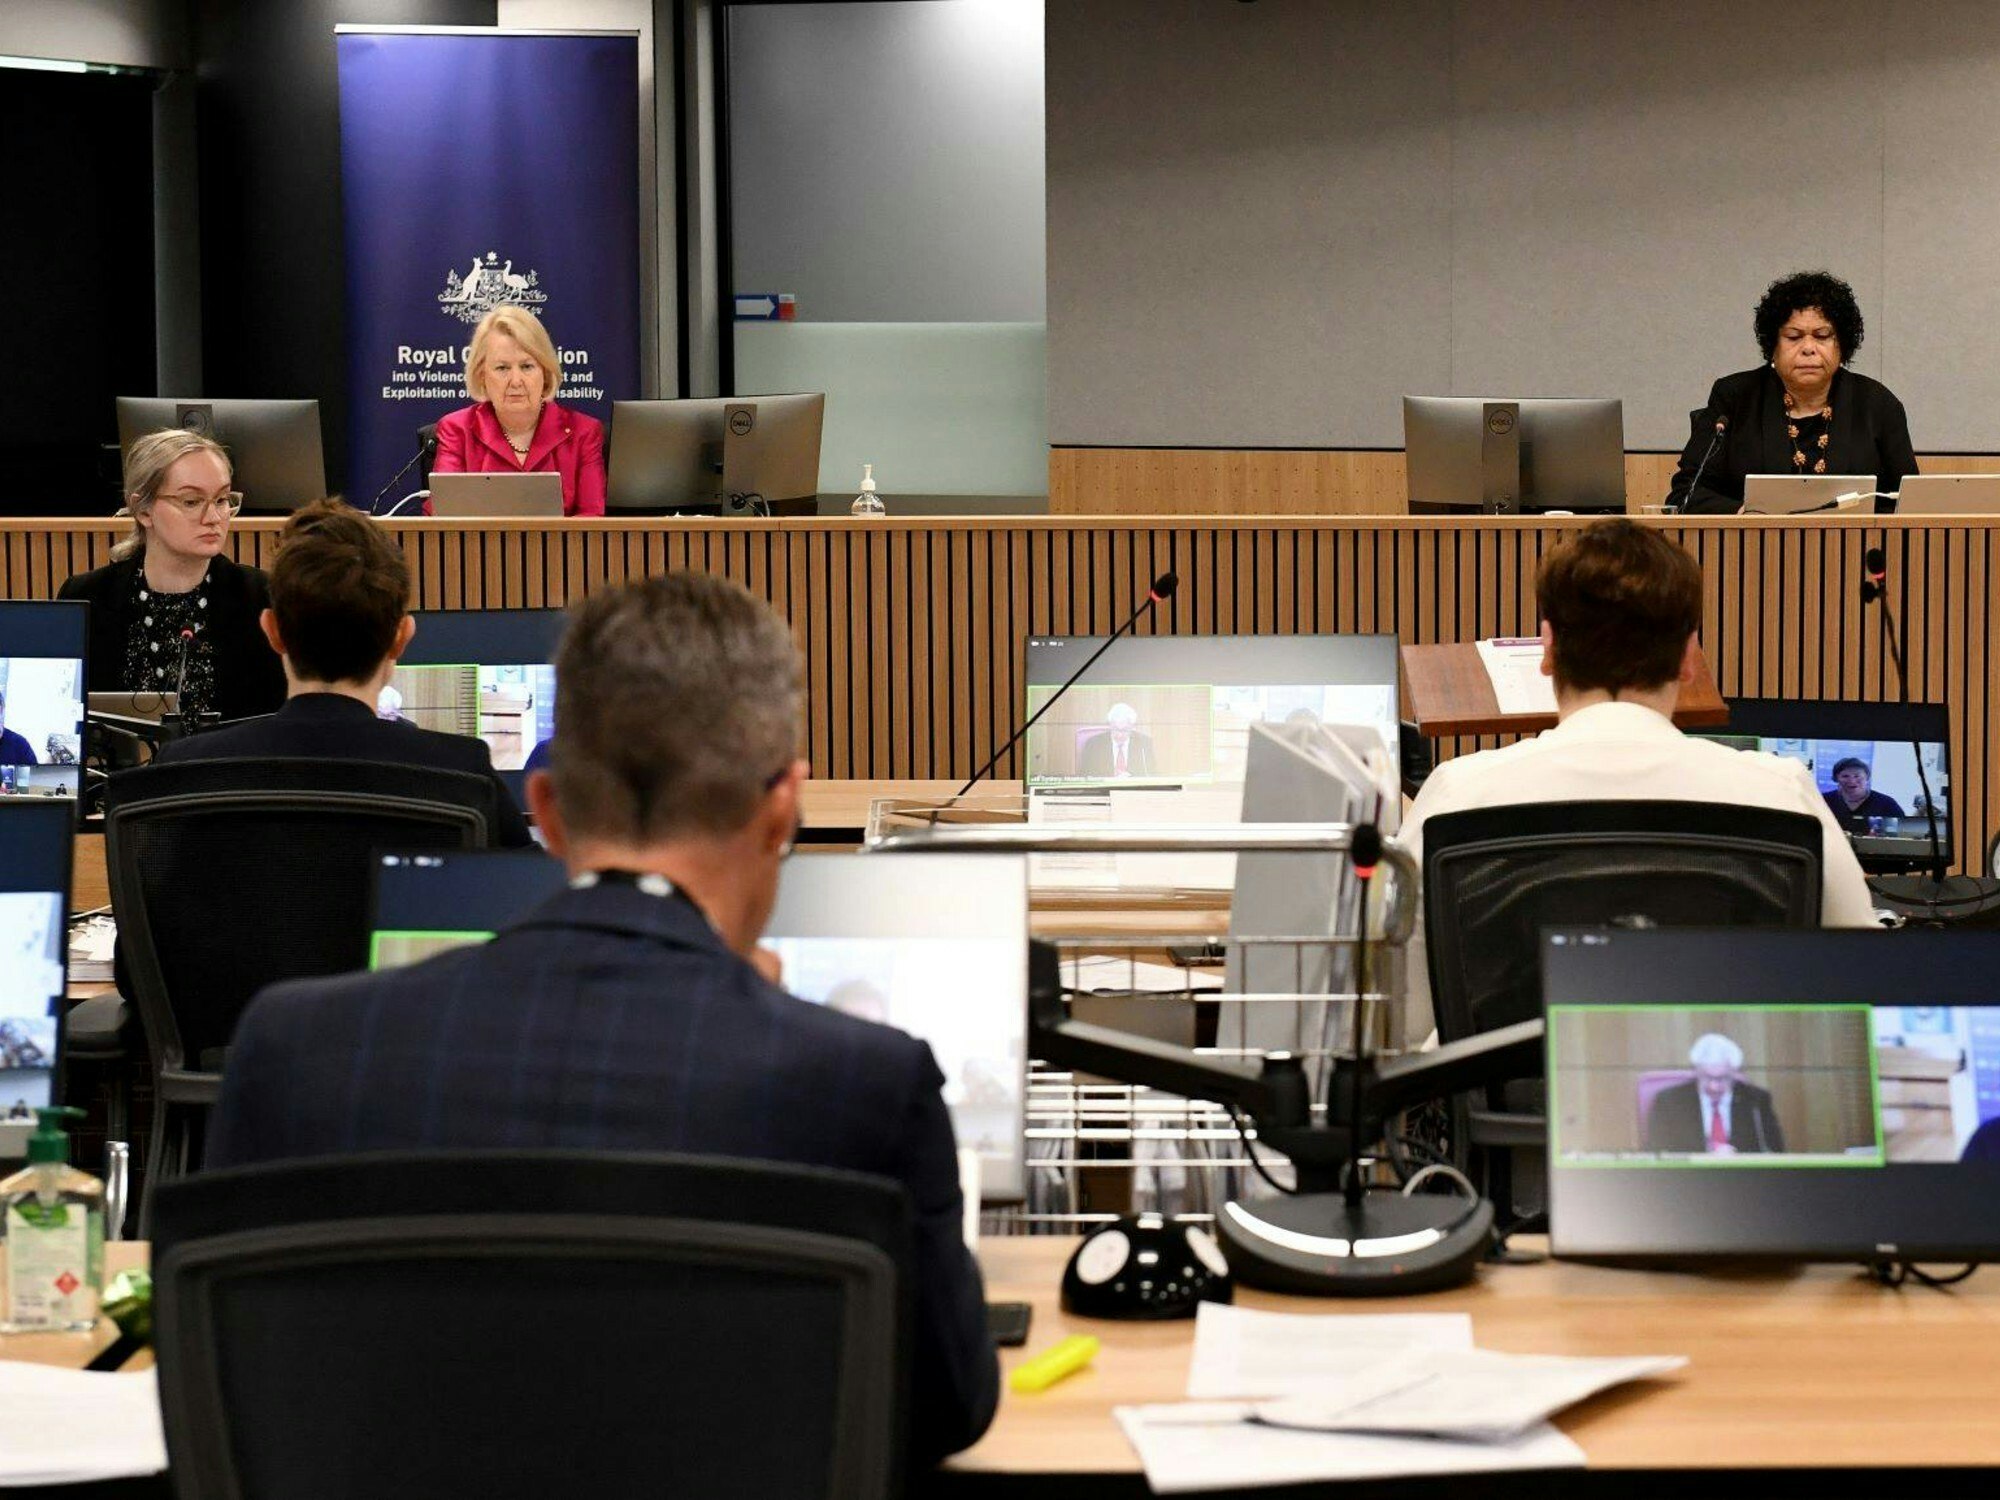 <p>The Royal Commission encourages responses to its latest issues paper by 11 June 2021.[Source: Disability Royal Commission]</p>
